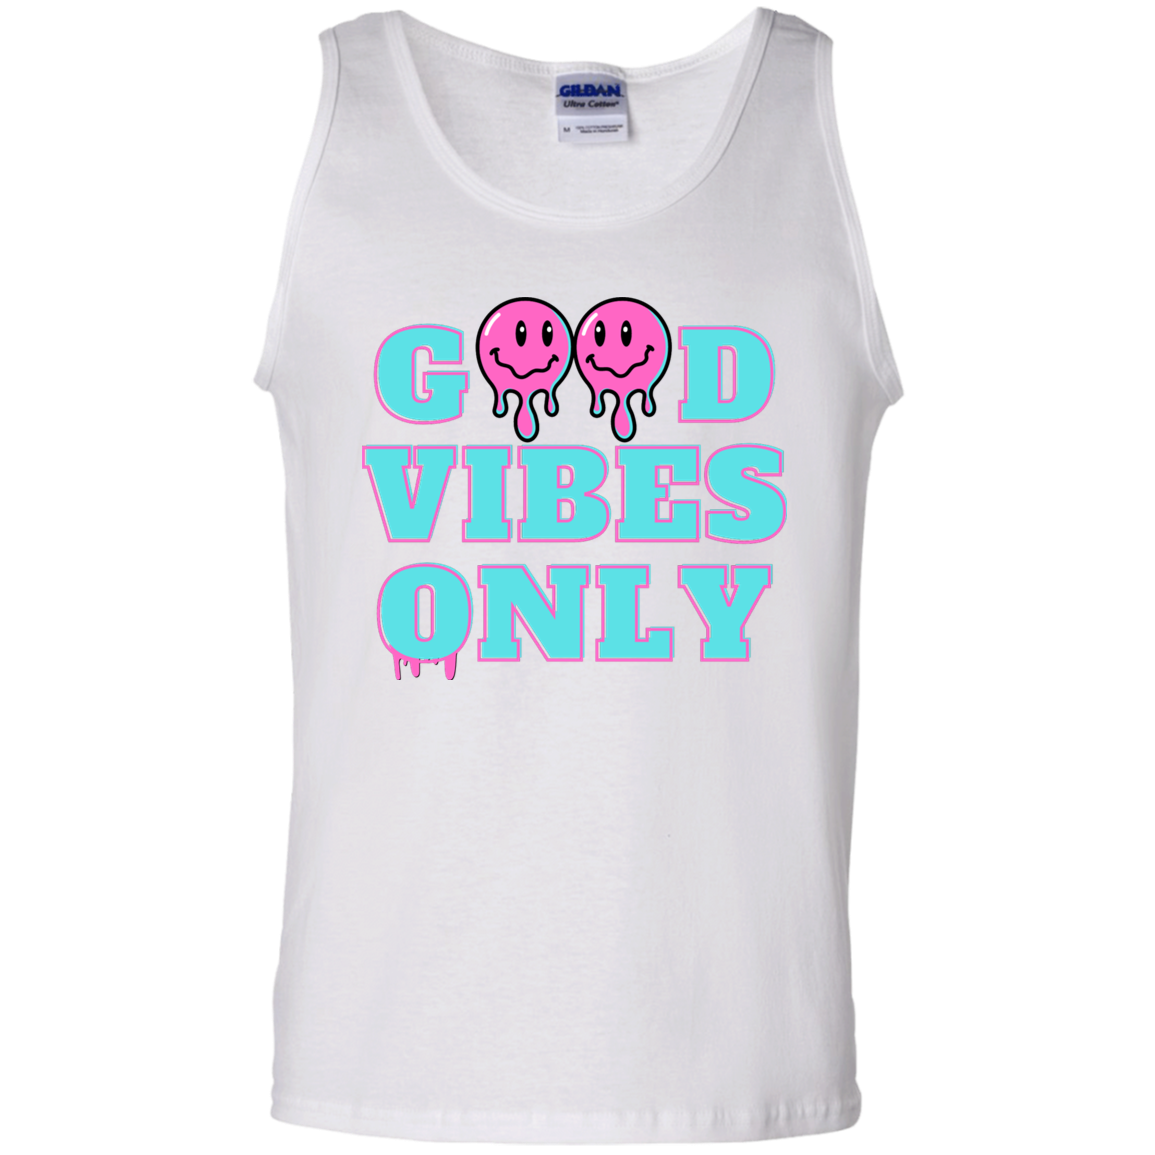 Good Vibes Only - Men's Tank Top